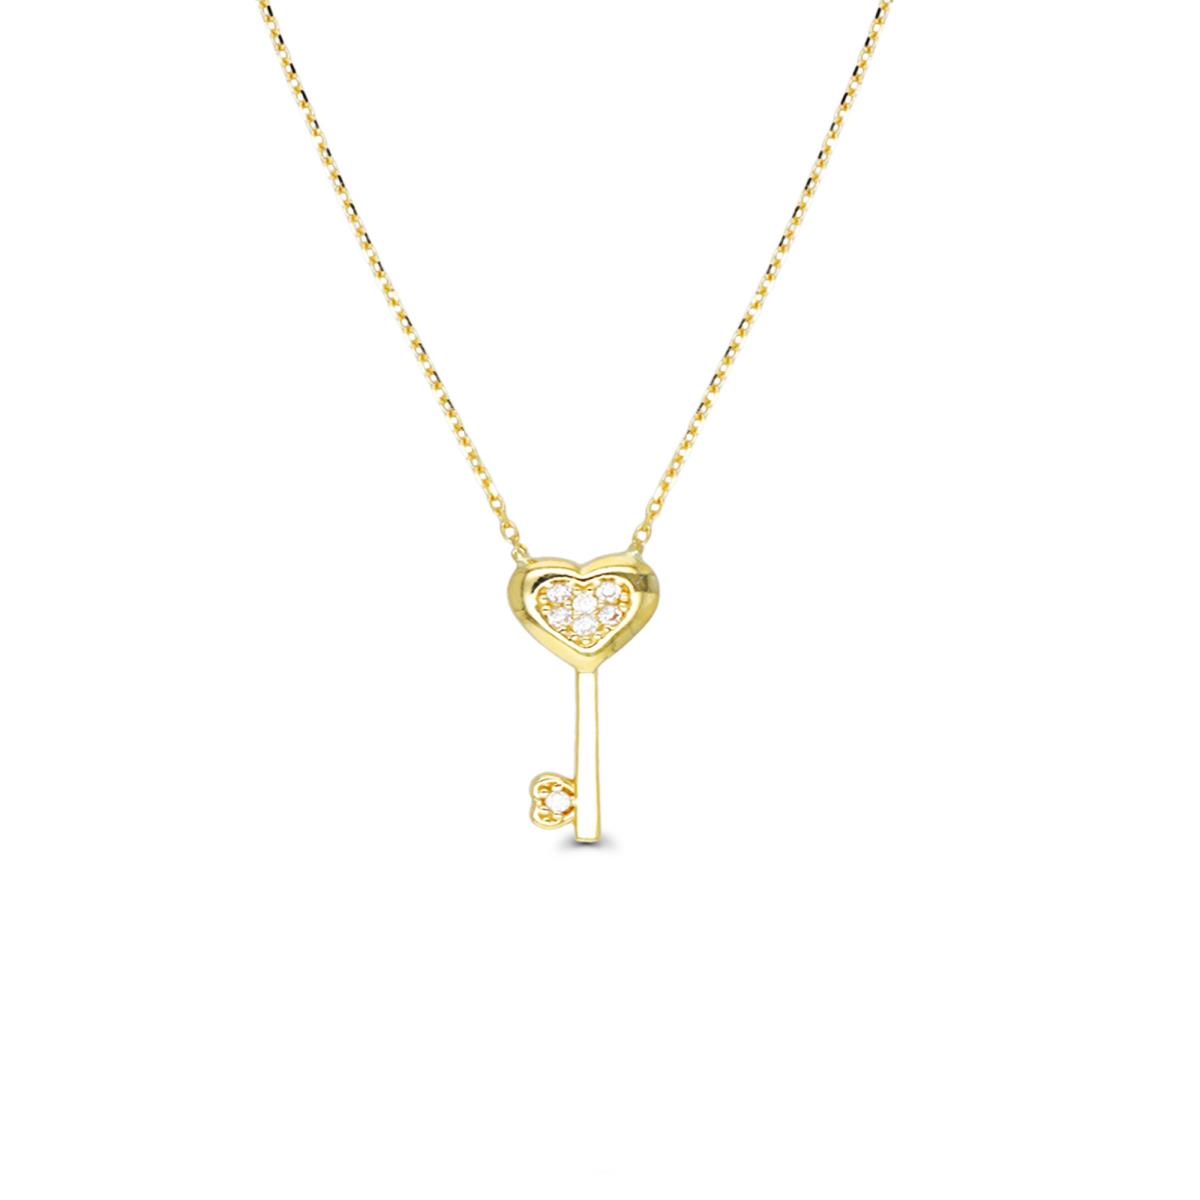 10K Yellow Gold Heart Key 16"+2" Necklace